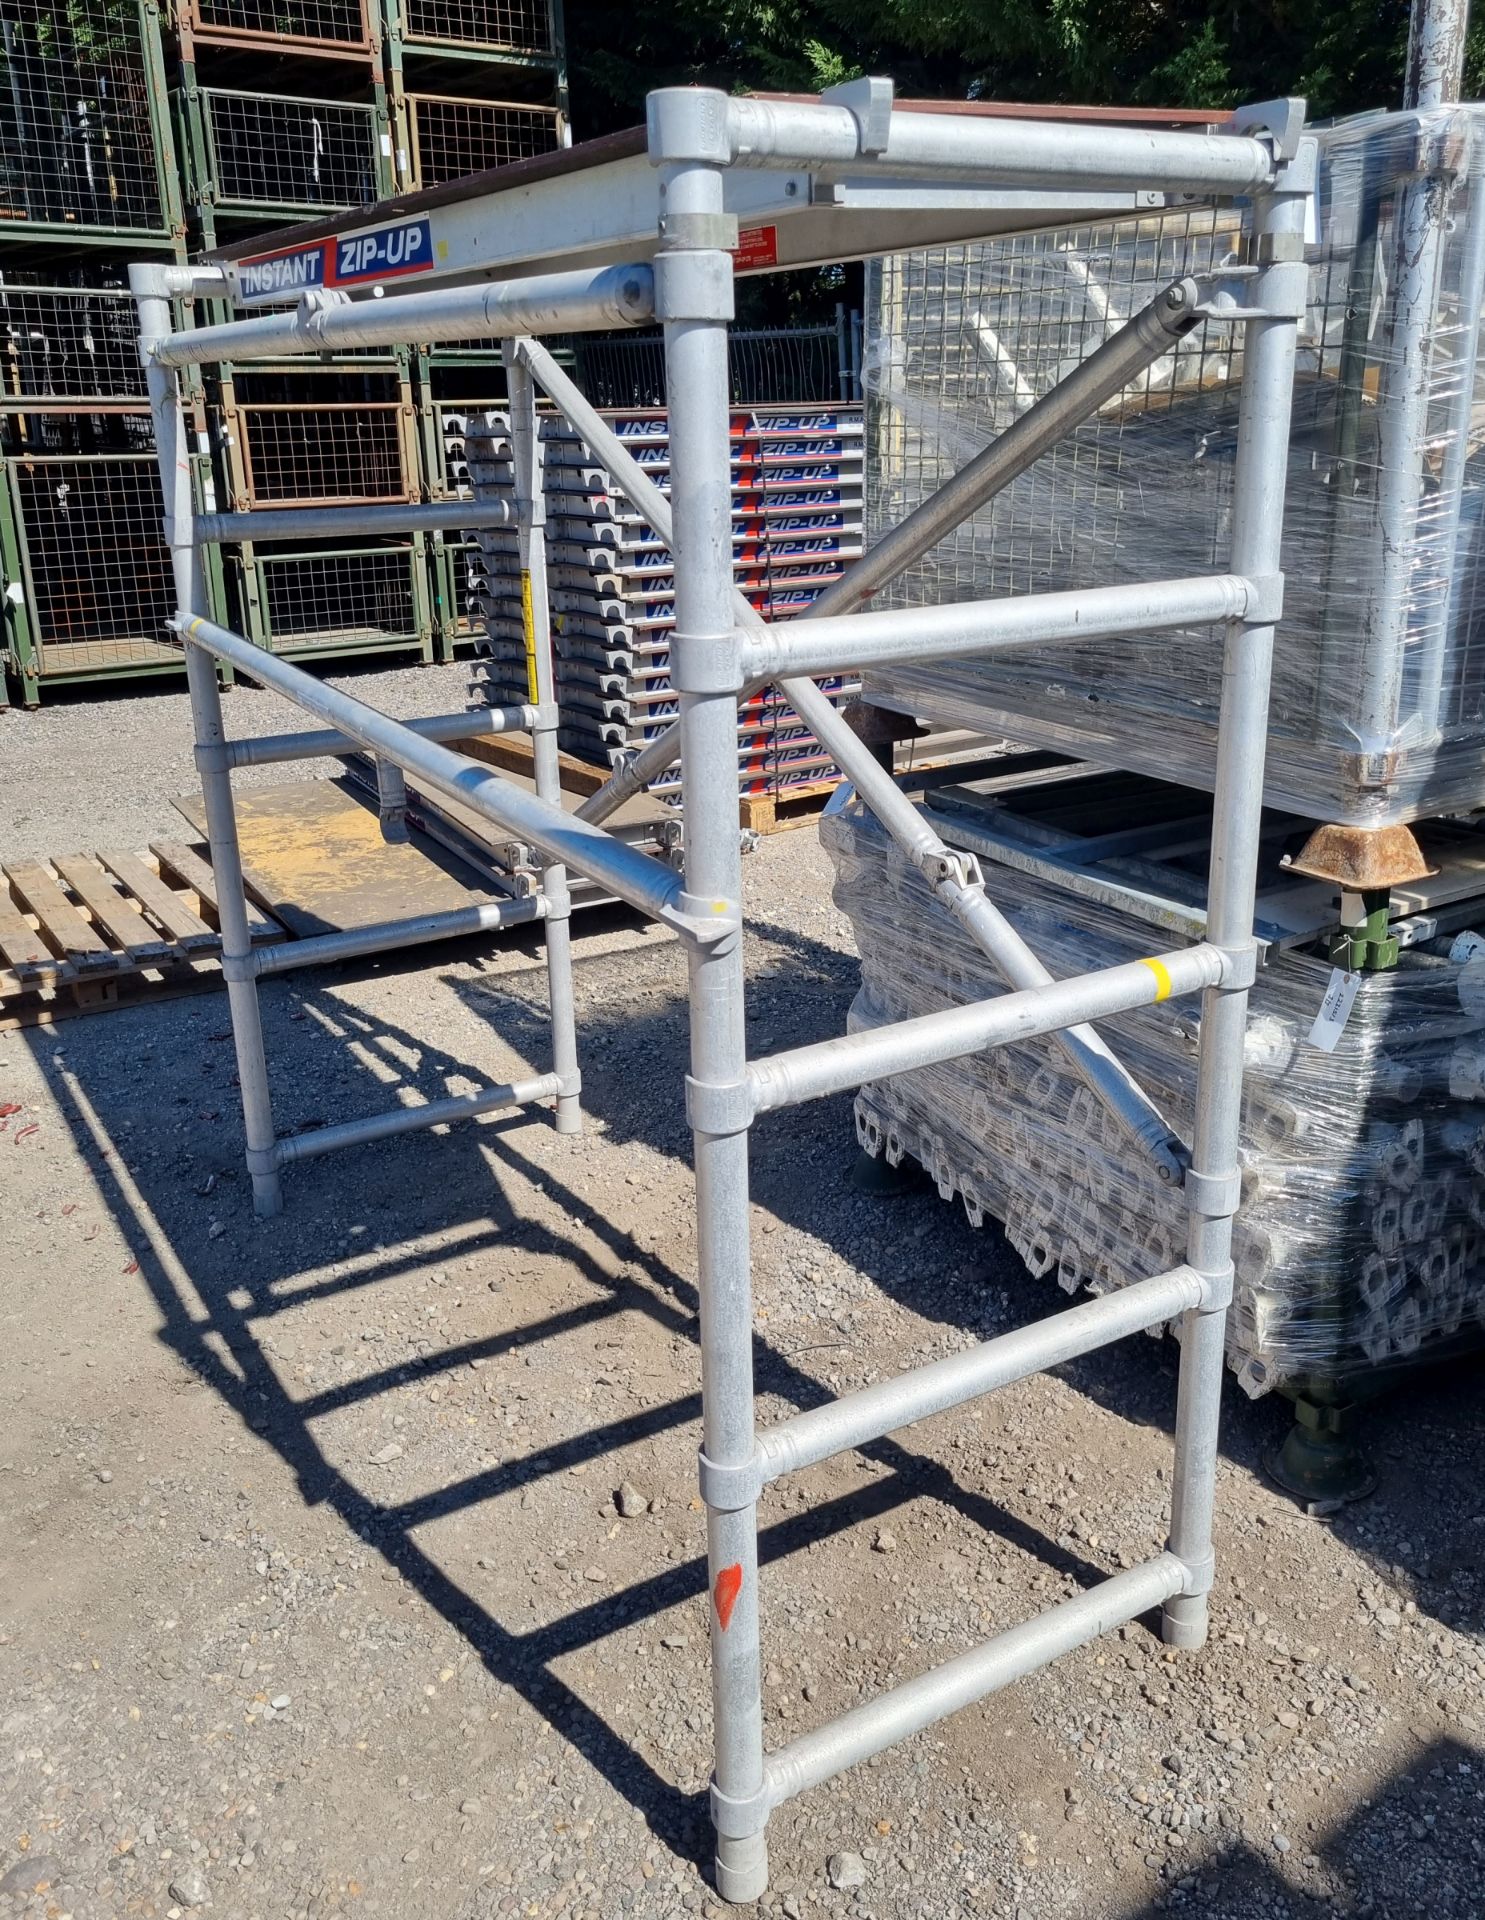 Scaffolding Tower Consisting of - Instant zip-up Scaffold tower platform L200 x W61 x H8.5cm, Instan - Image 3 of 4